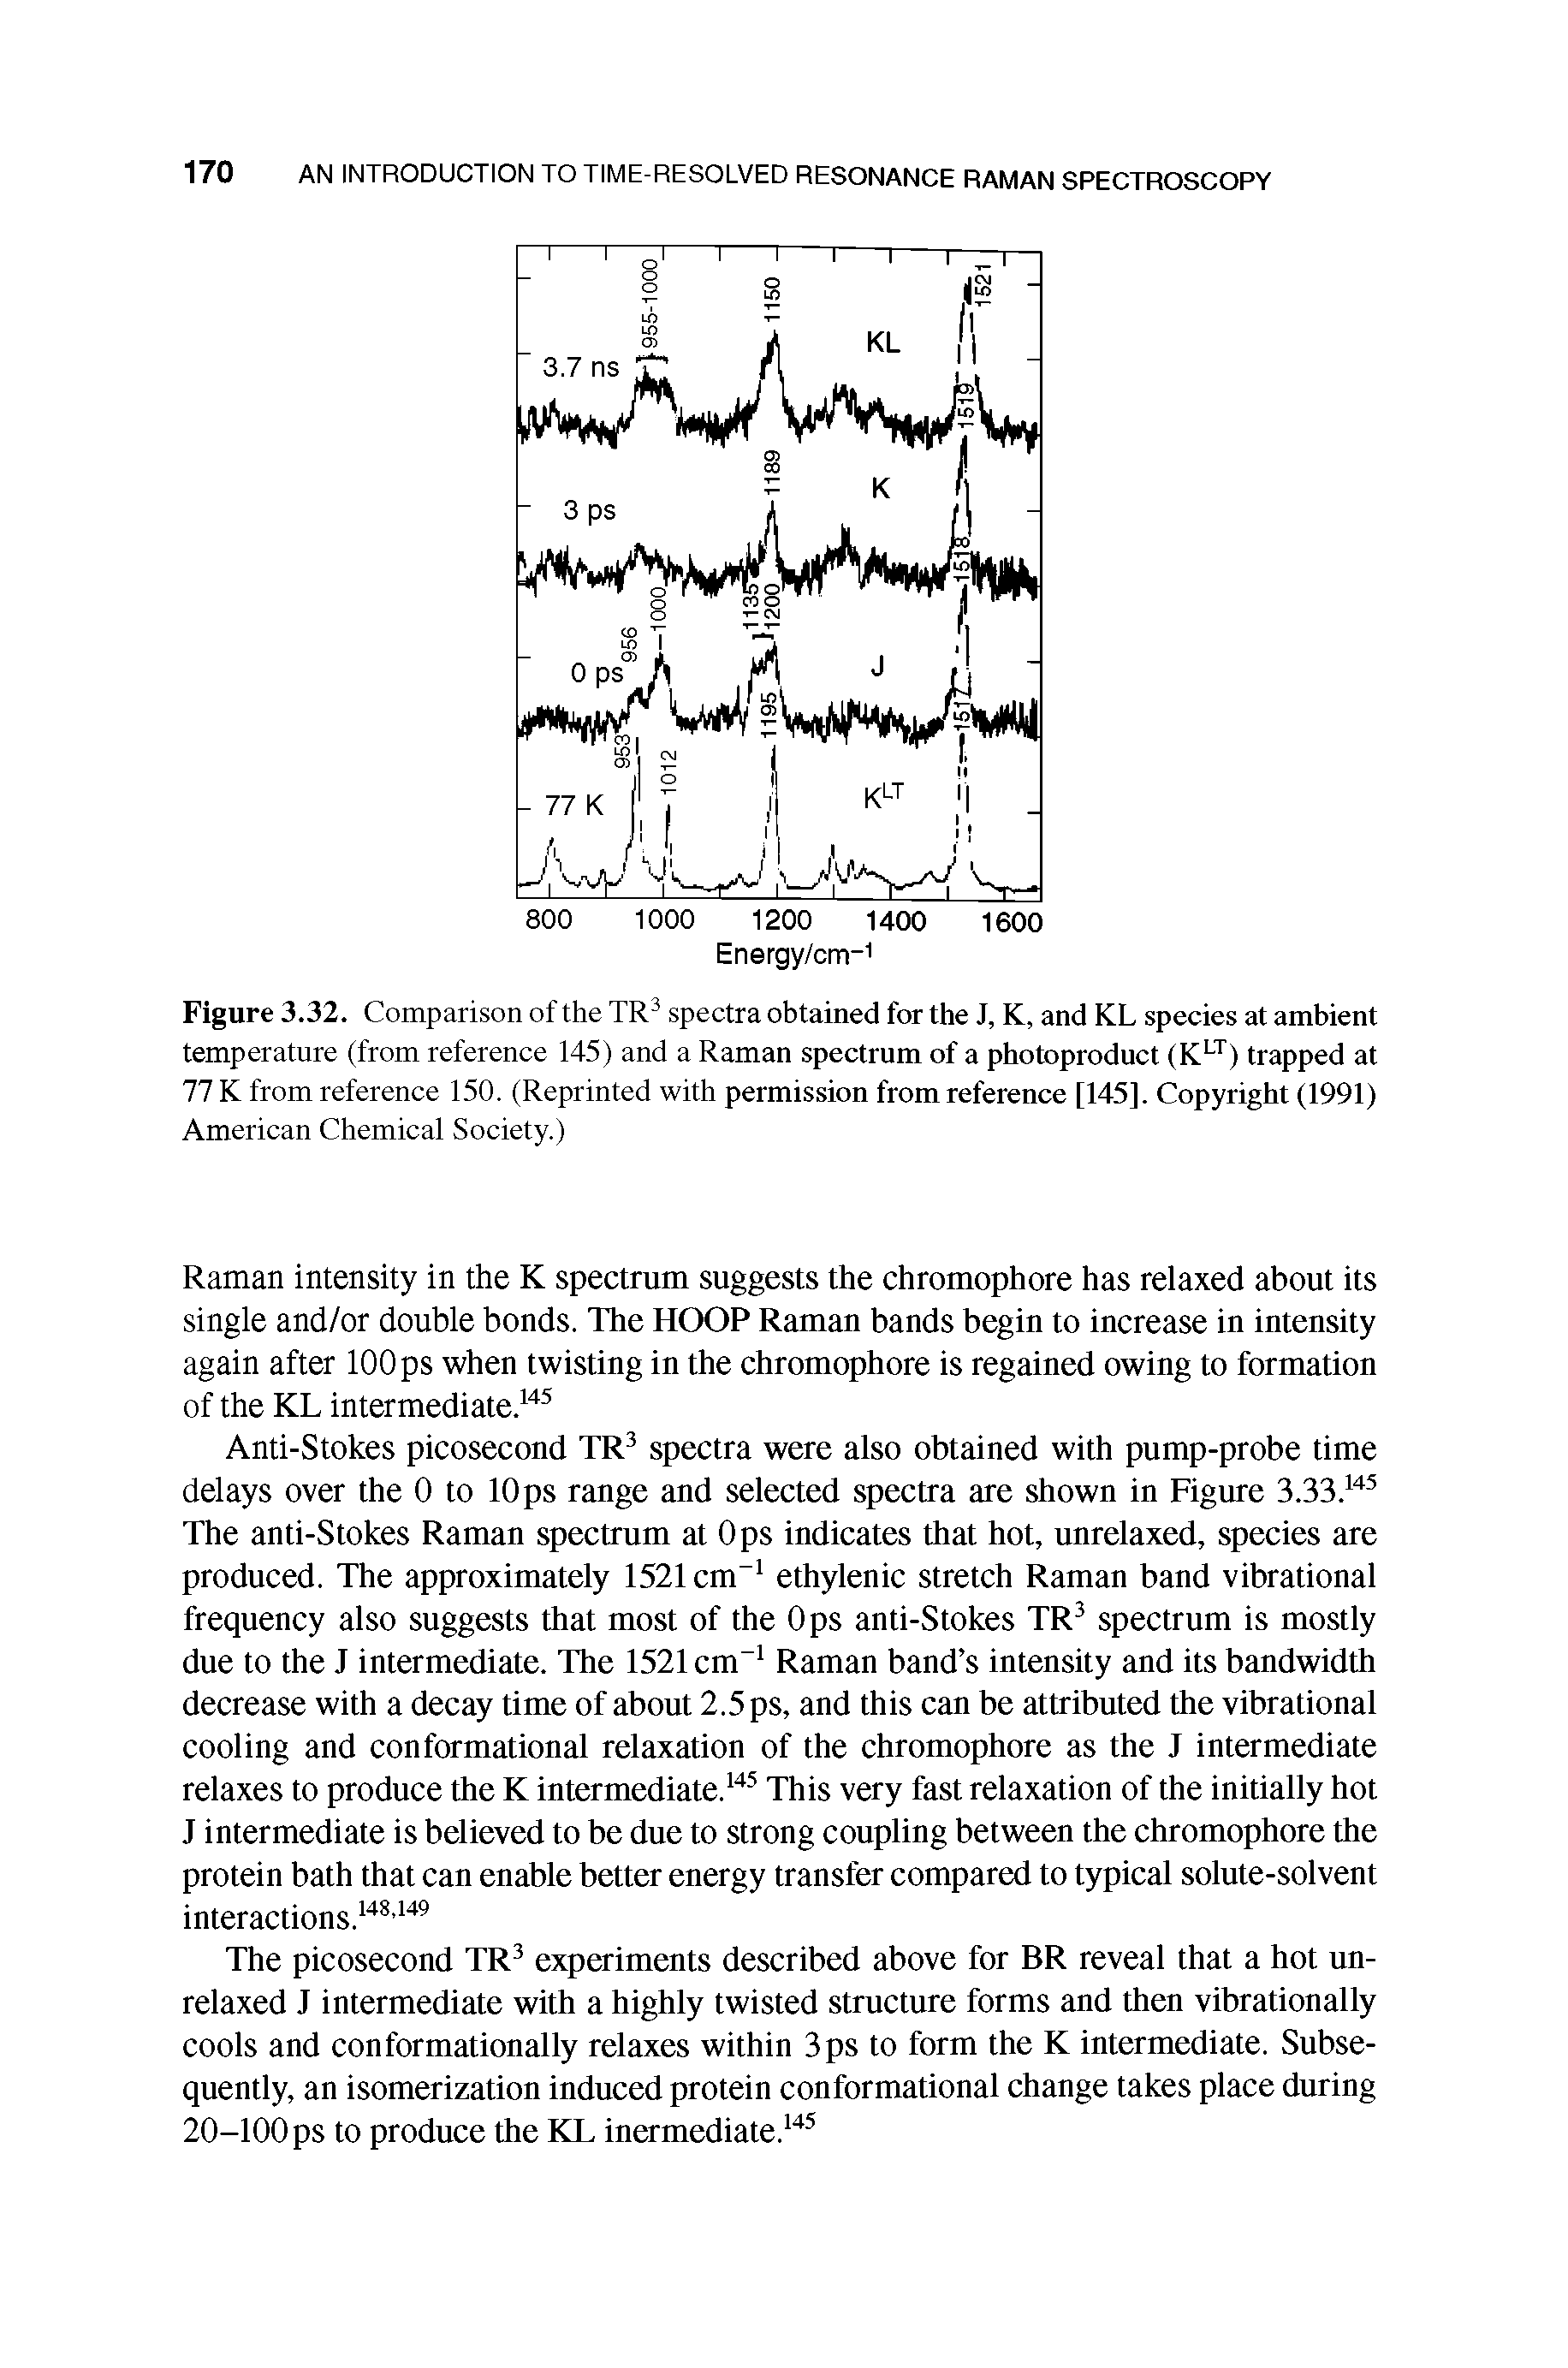 Figure 3.32. Comparison of the TR spectra obtained for the J, K, and KL species at ambient temperature (from reference 145) and a Raman spectrum of a photoproduct (K ) trapped at 77 K from reference 150. (Reprinted with permission from reference [145]. Copyright (1991) American Chemical Society.)...